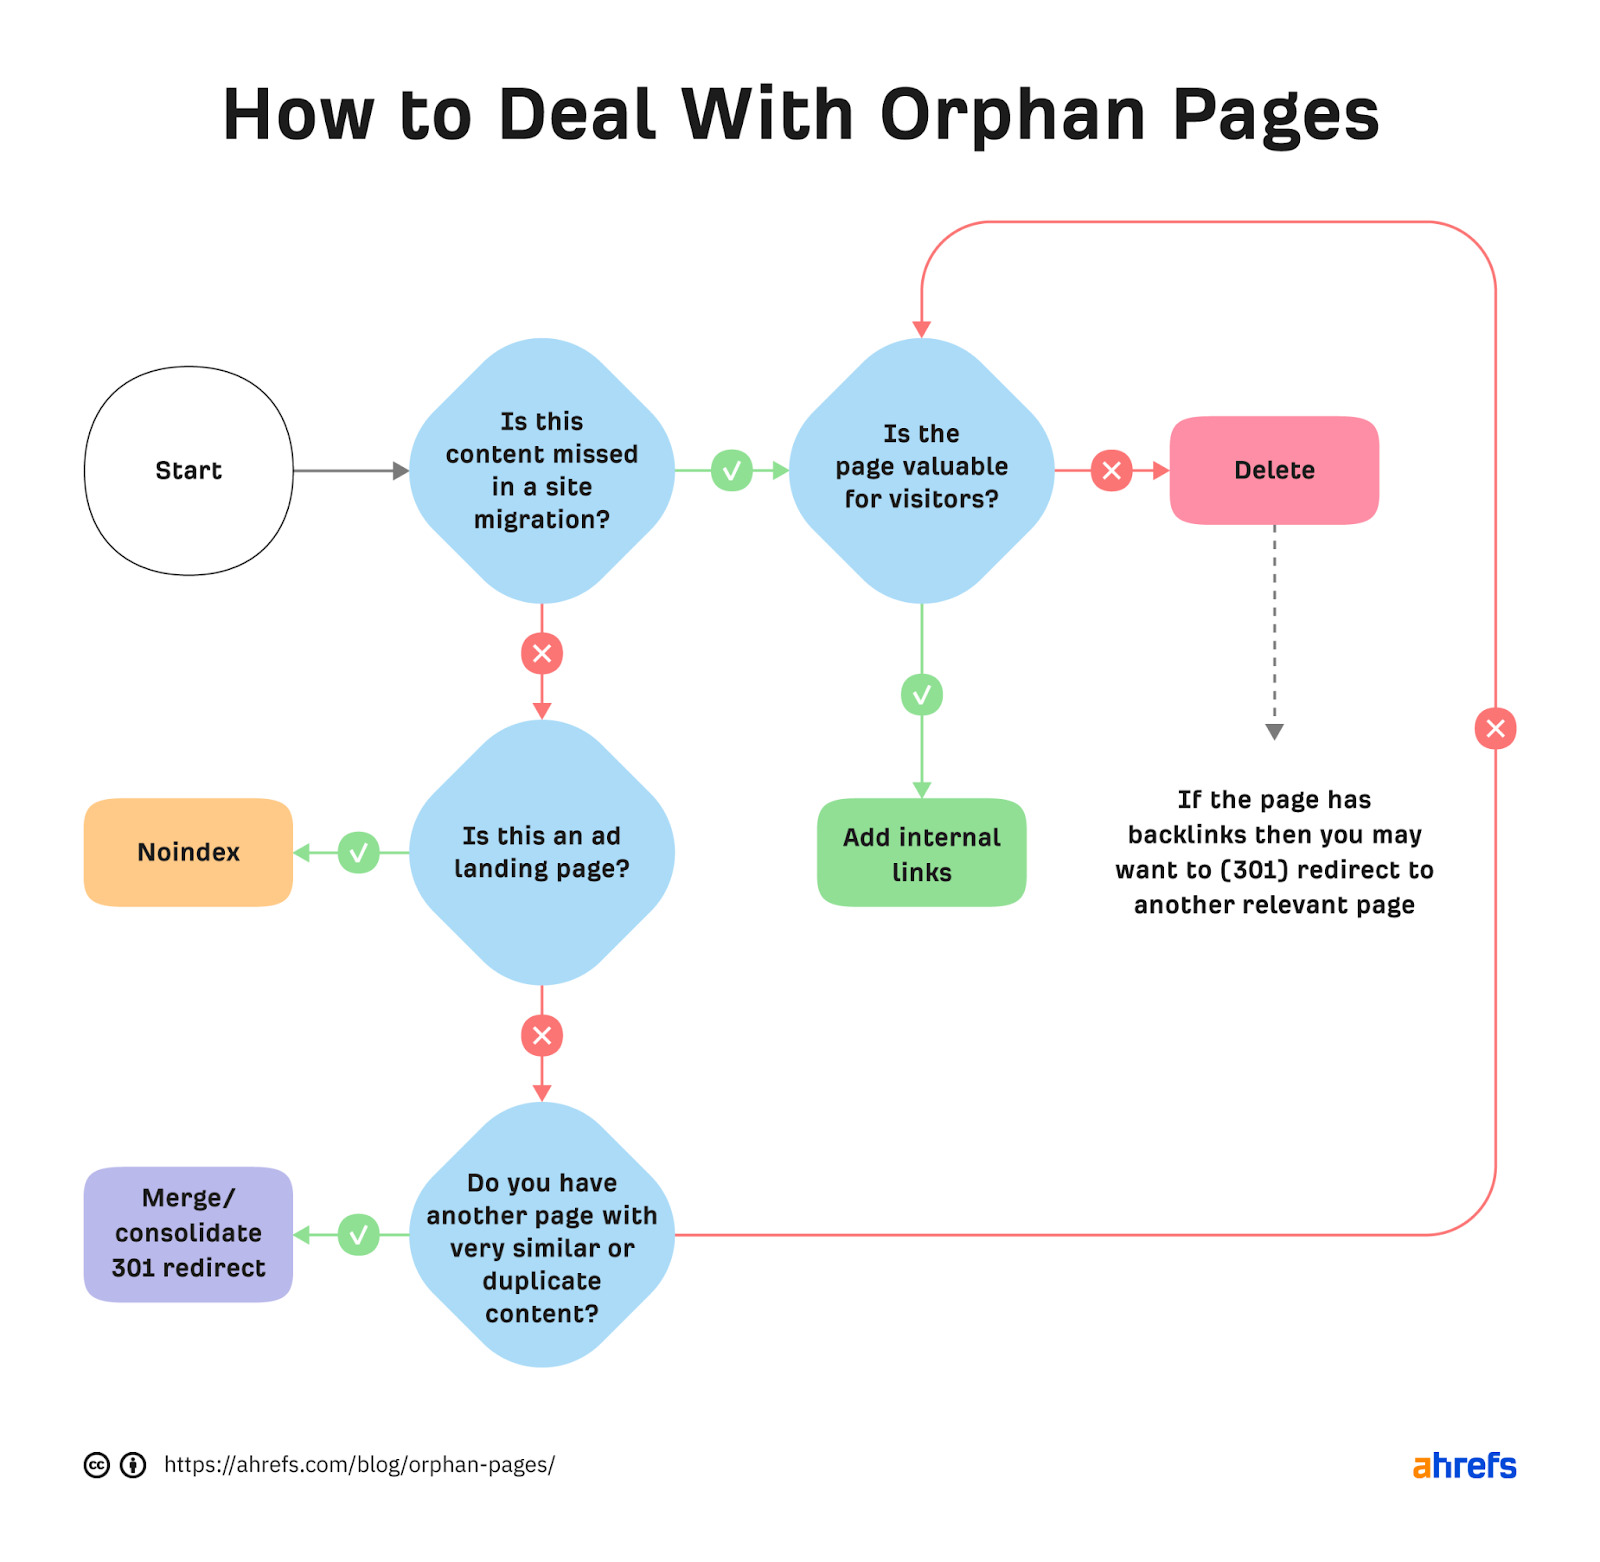 How to deal with orphan pages flowchart